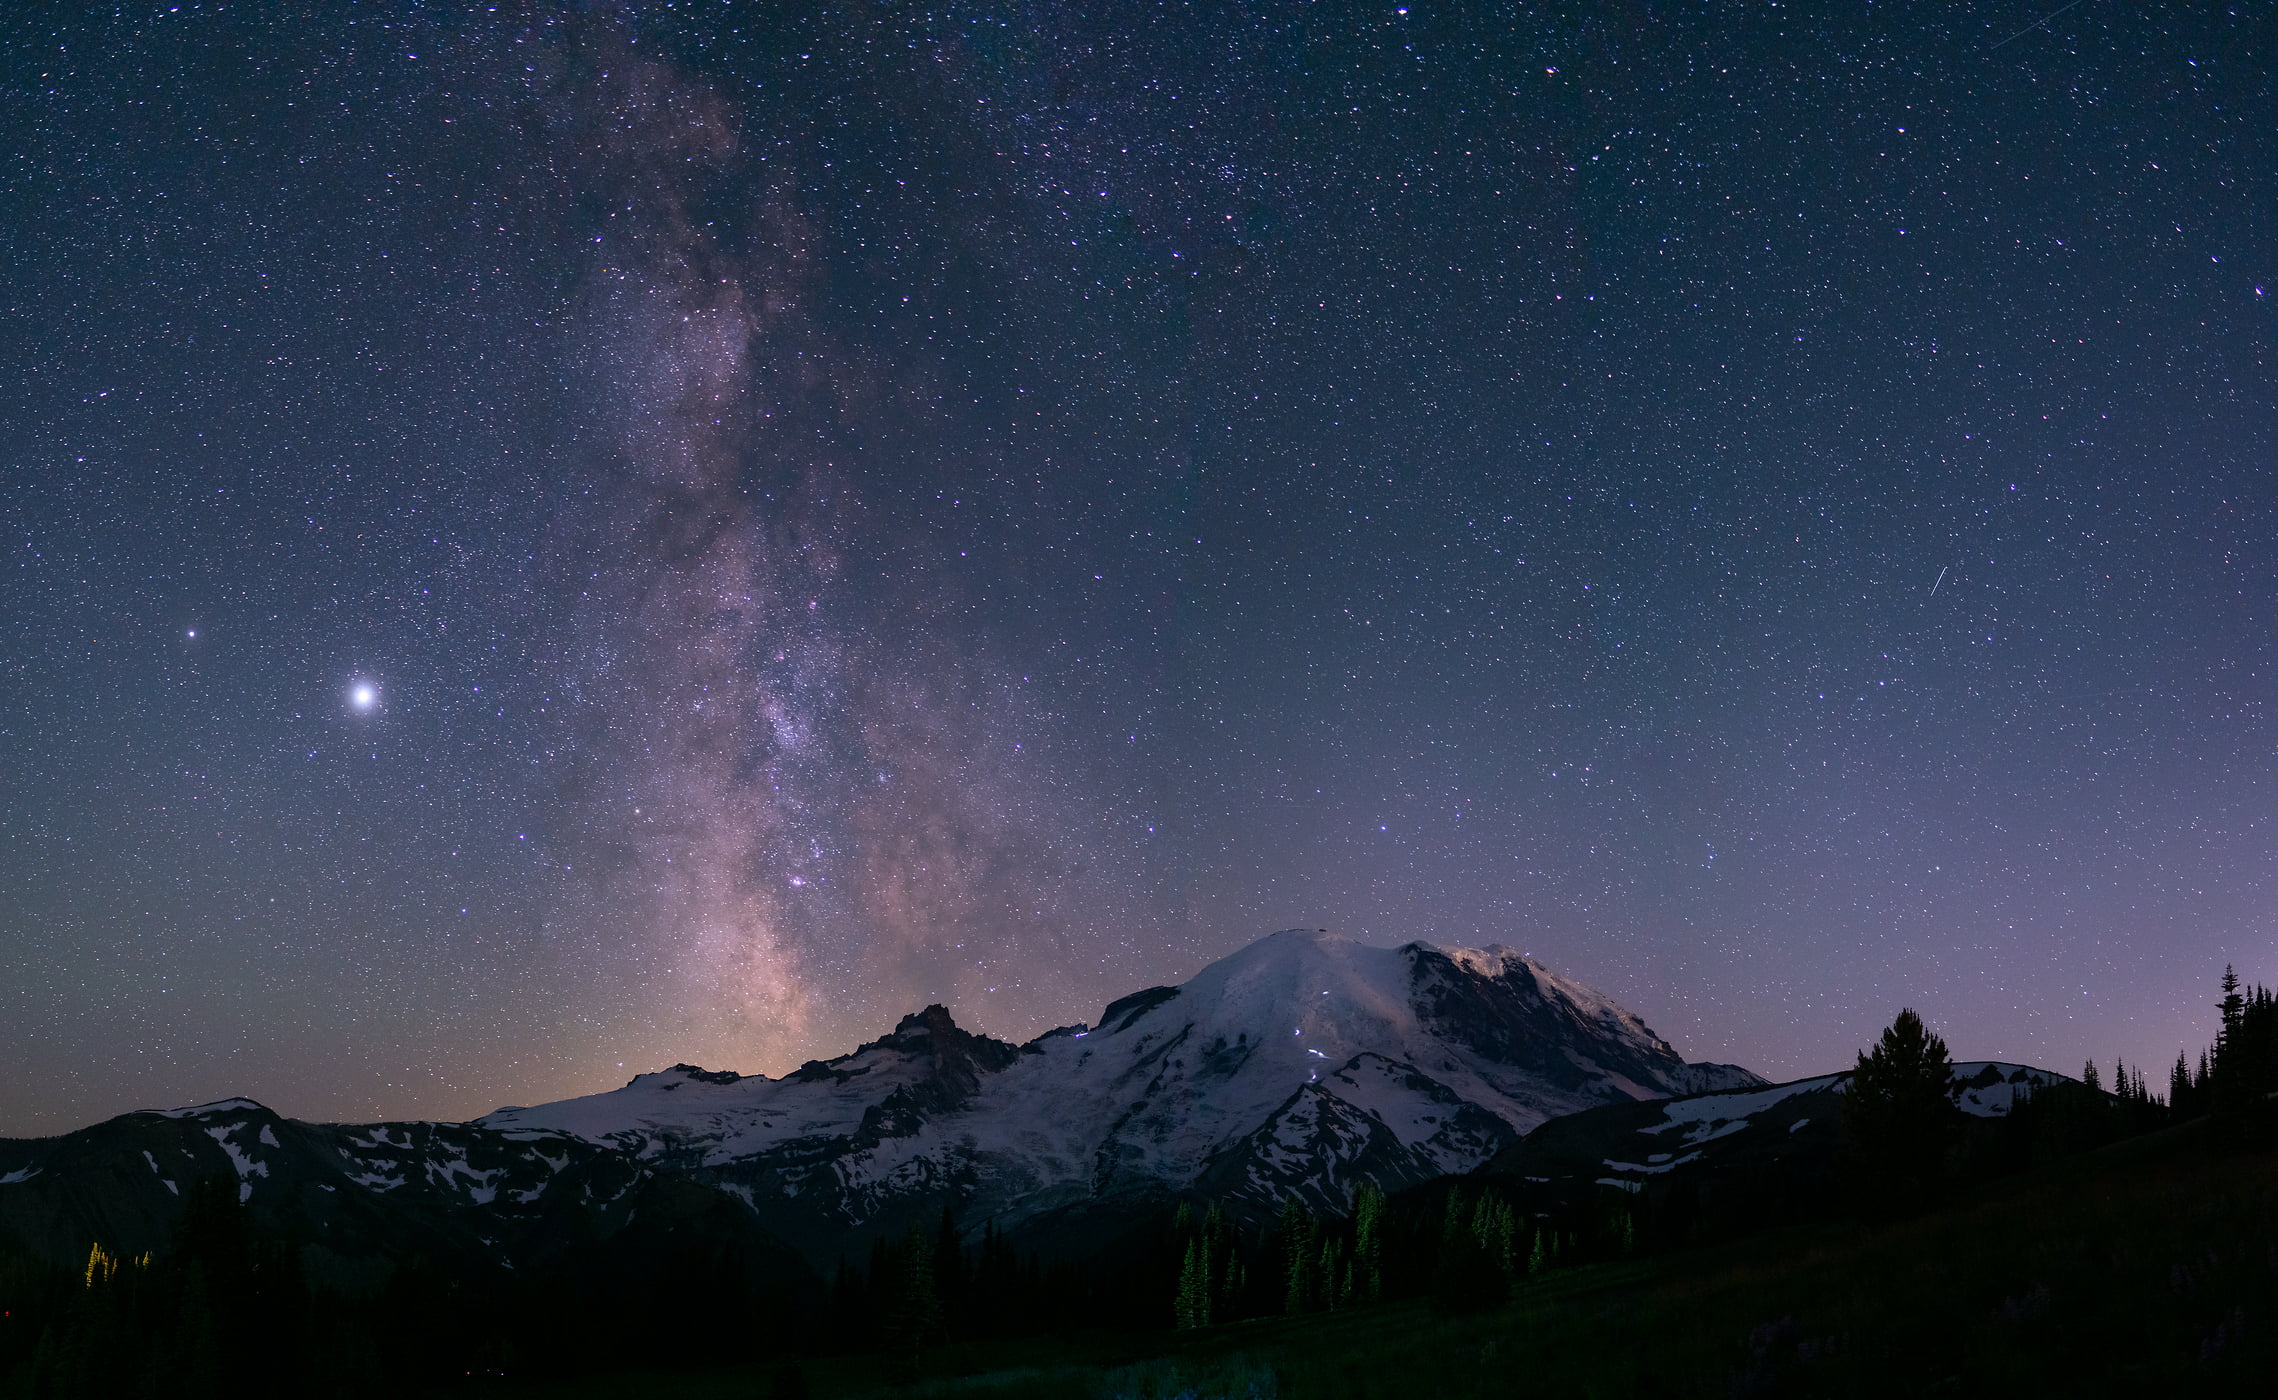 157 megapixels! A very high resolution, large-format VAST photo print of Mt. Rainier at night with the Milky Way; landscape astrophotograph created by Greg Probst in Mt. Rainier National Park, Washington